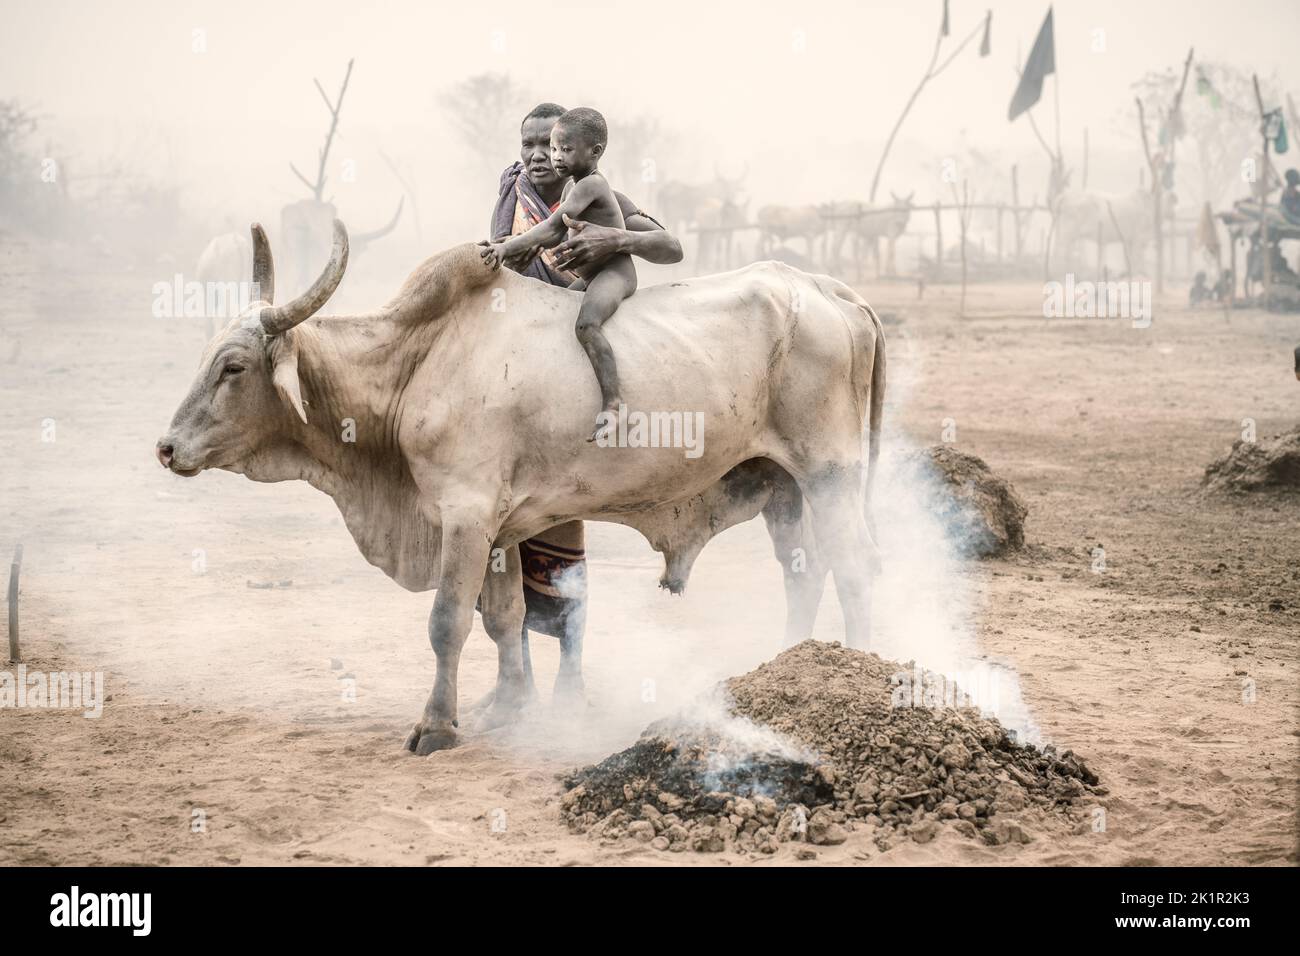 The bonding with the cattle starts young. South Sudan: THESE STUNNING images show the incredible bond between the Mundari people and their cattle in S Stock Photo